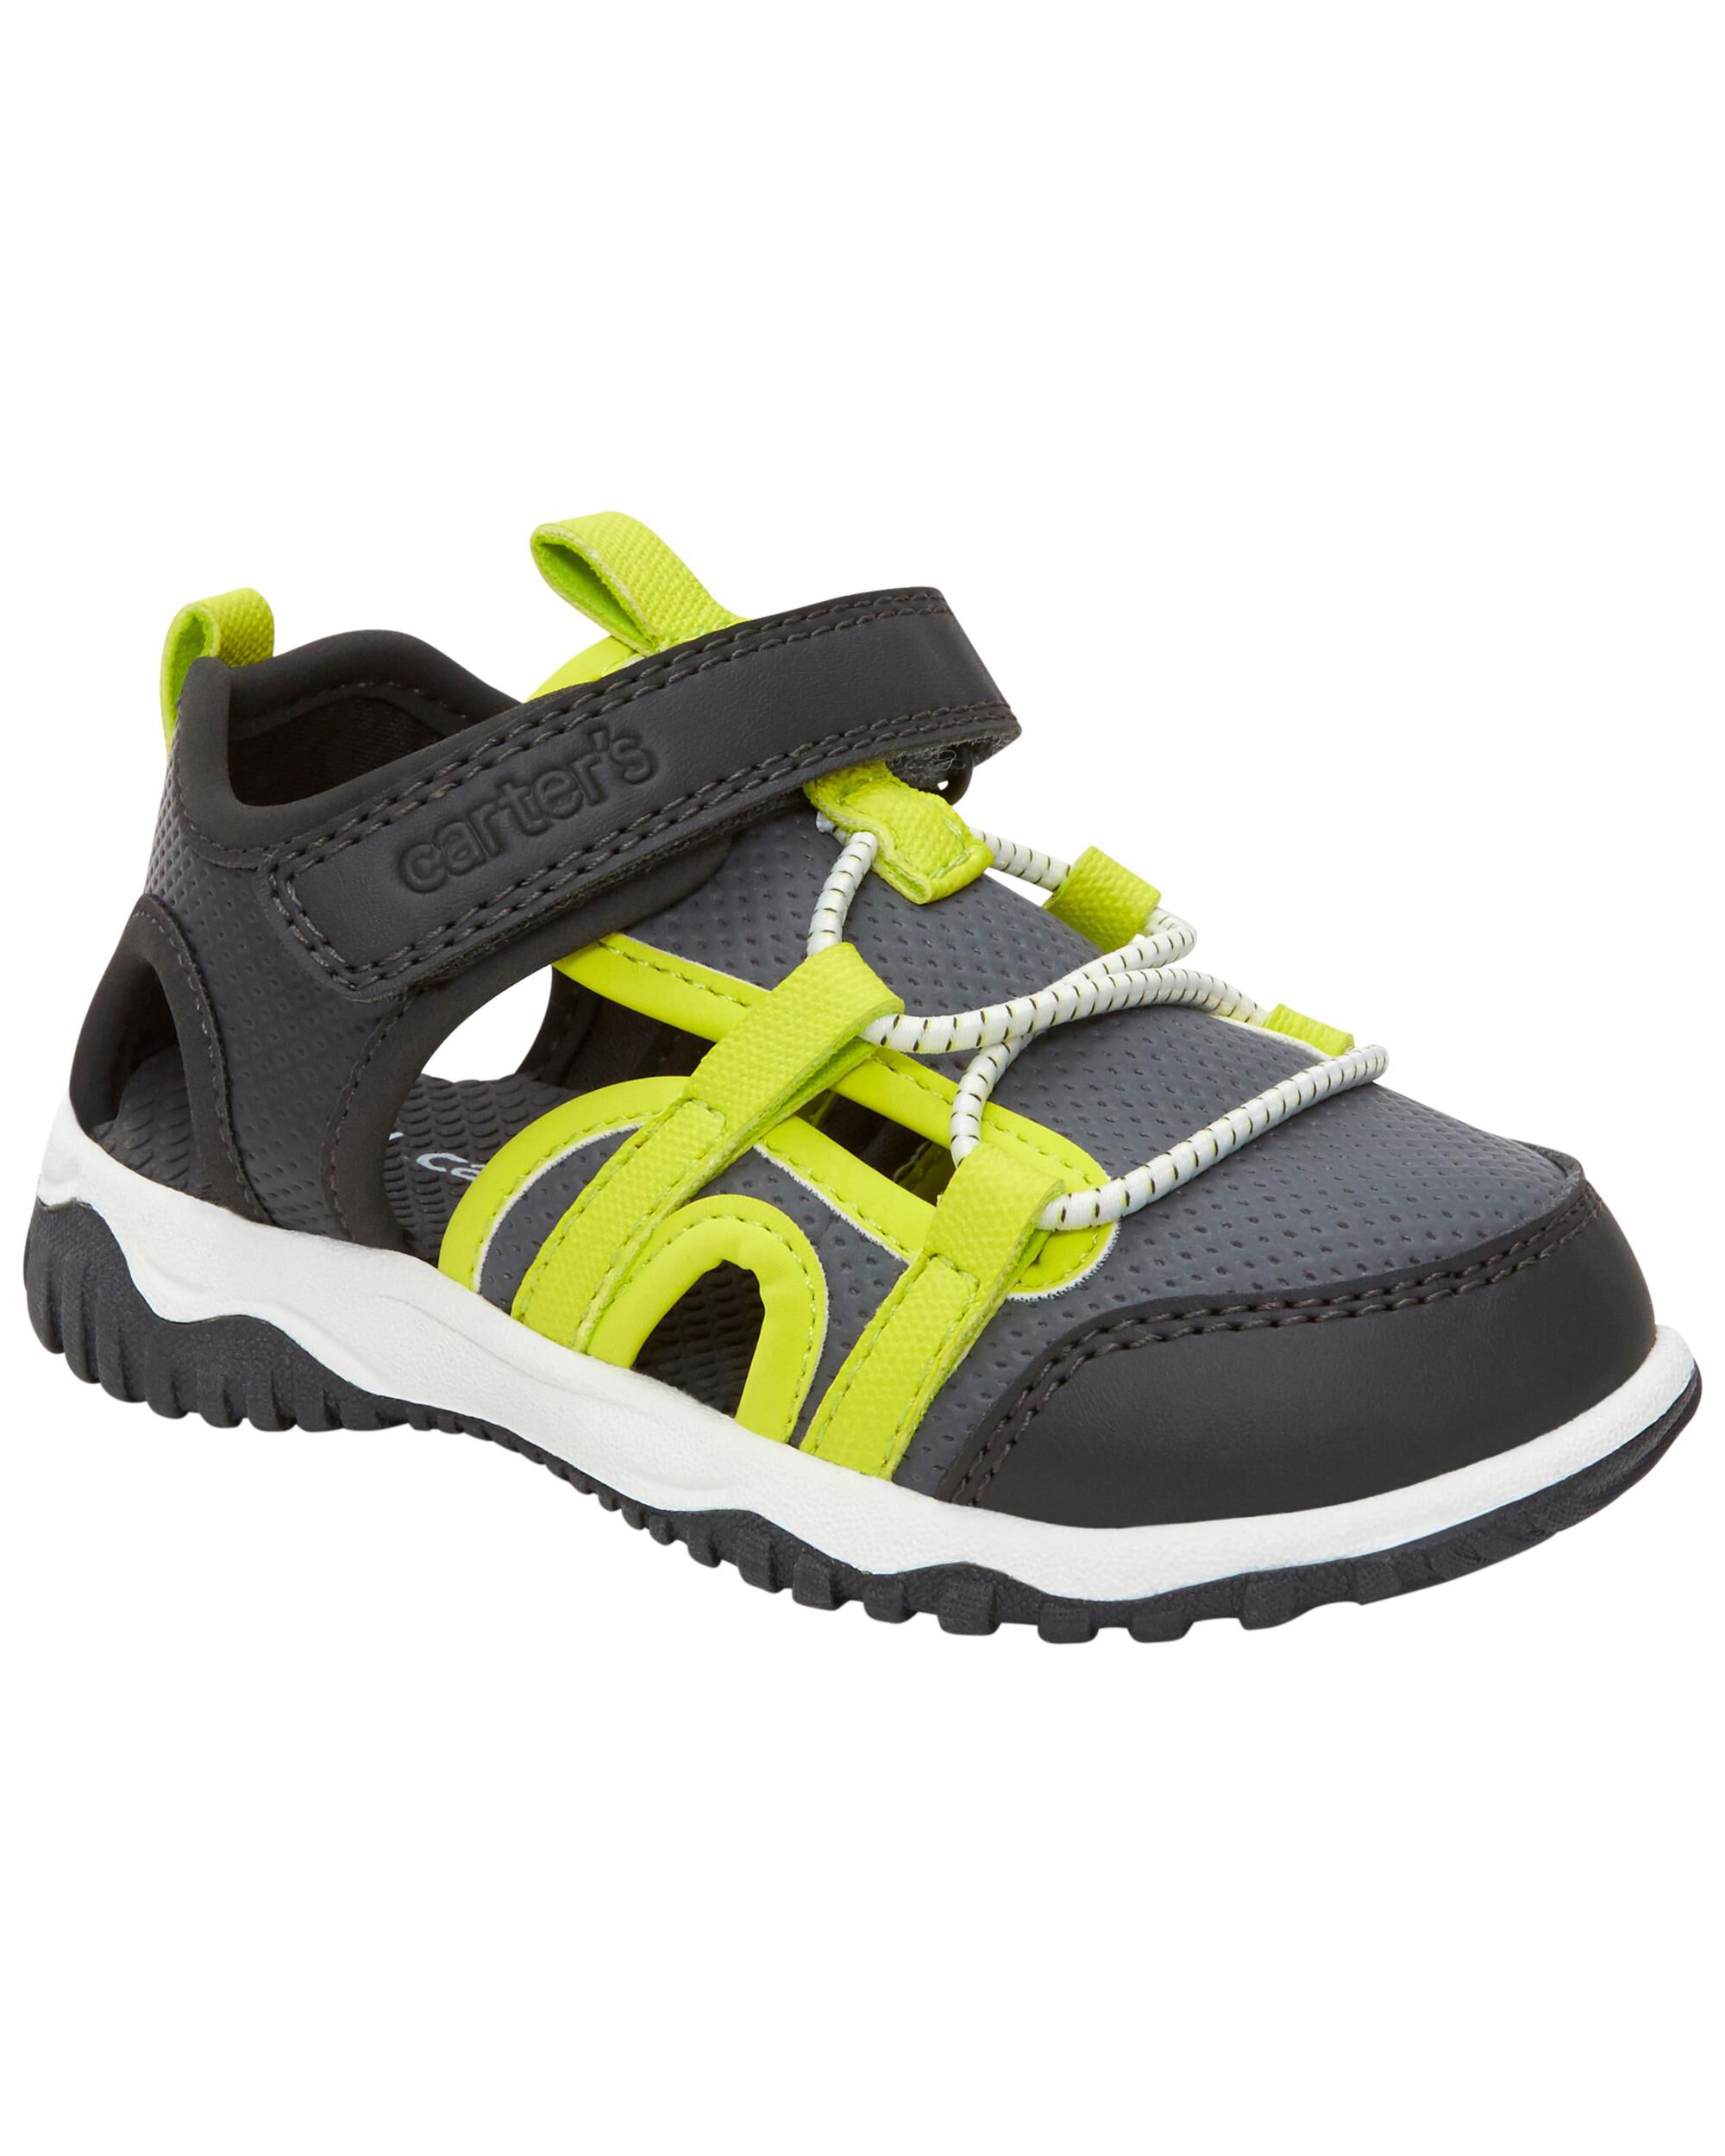 Toddler Boy Shoes (Sizes 4-12) Extra 10% off, Today Only 